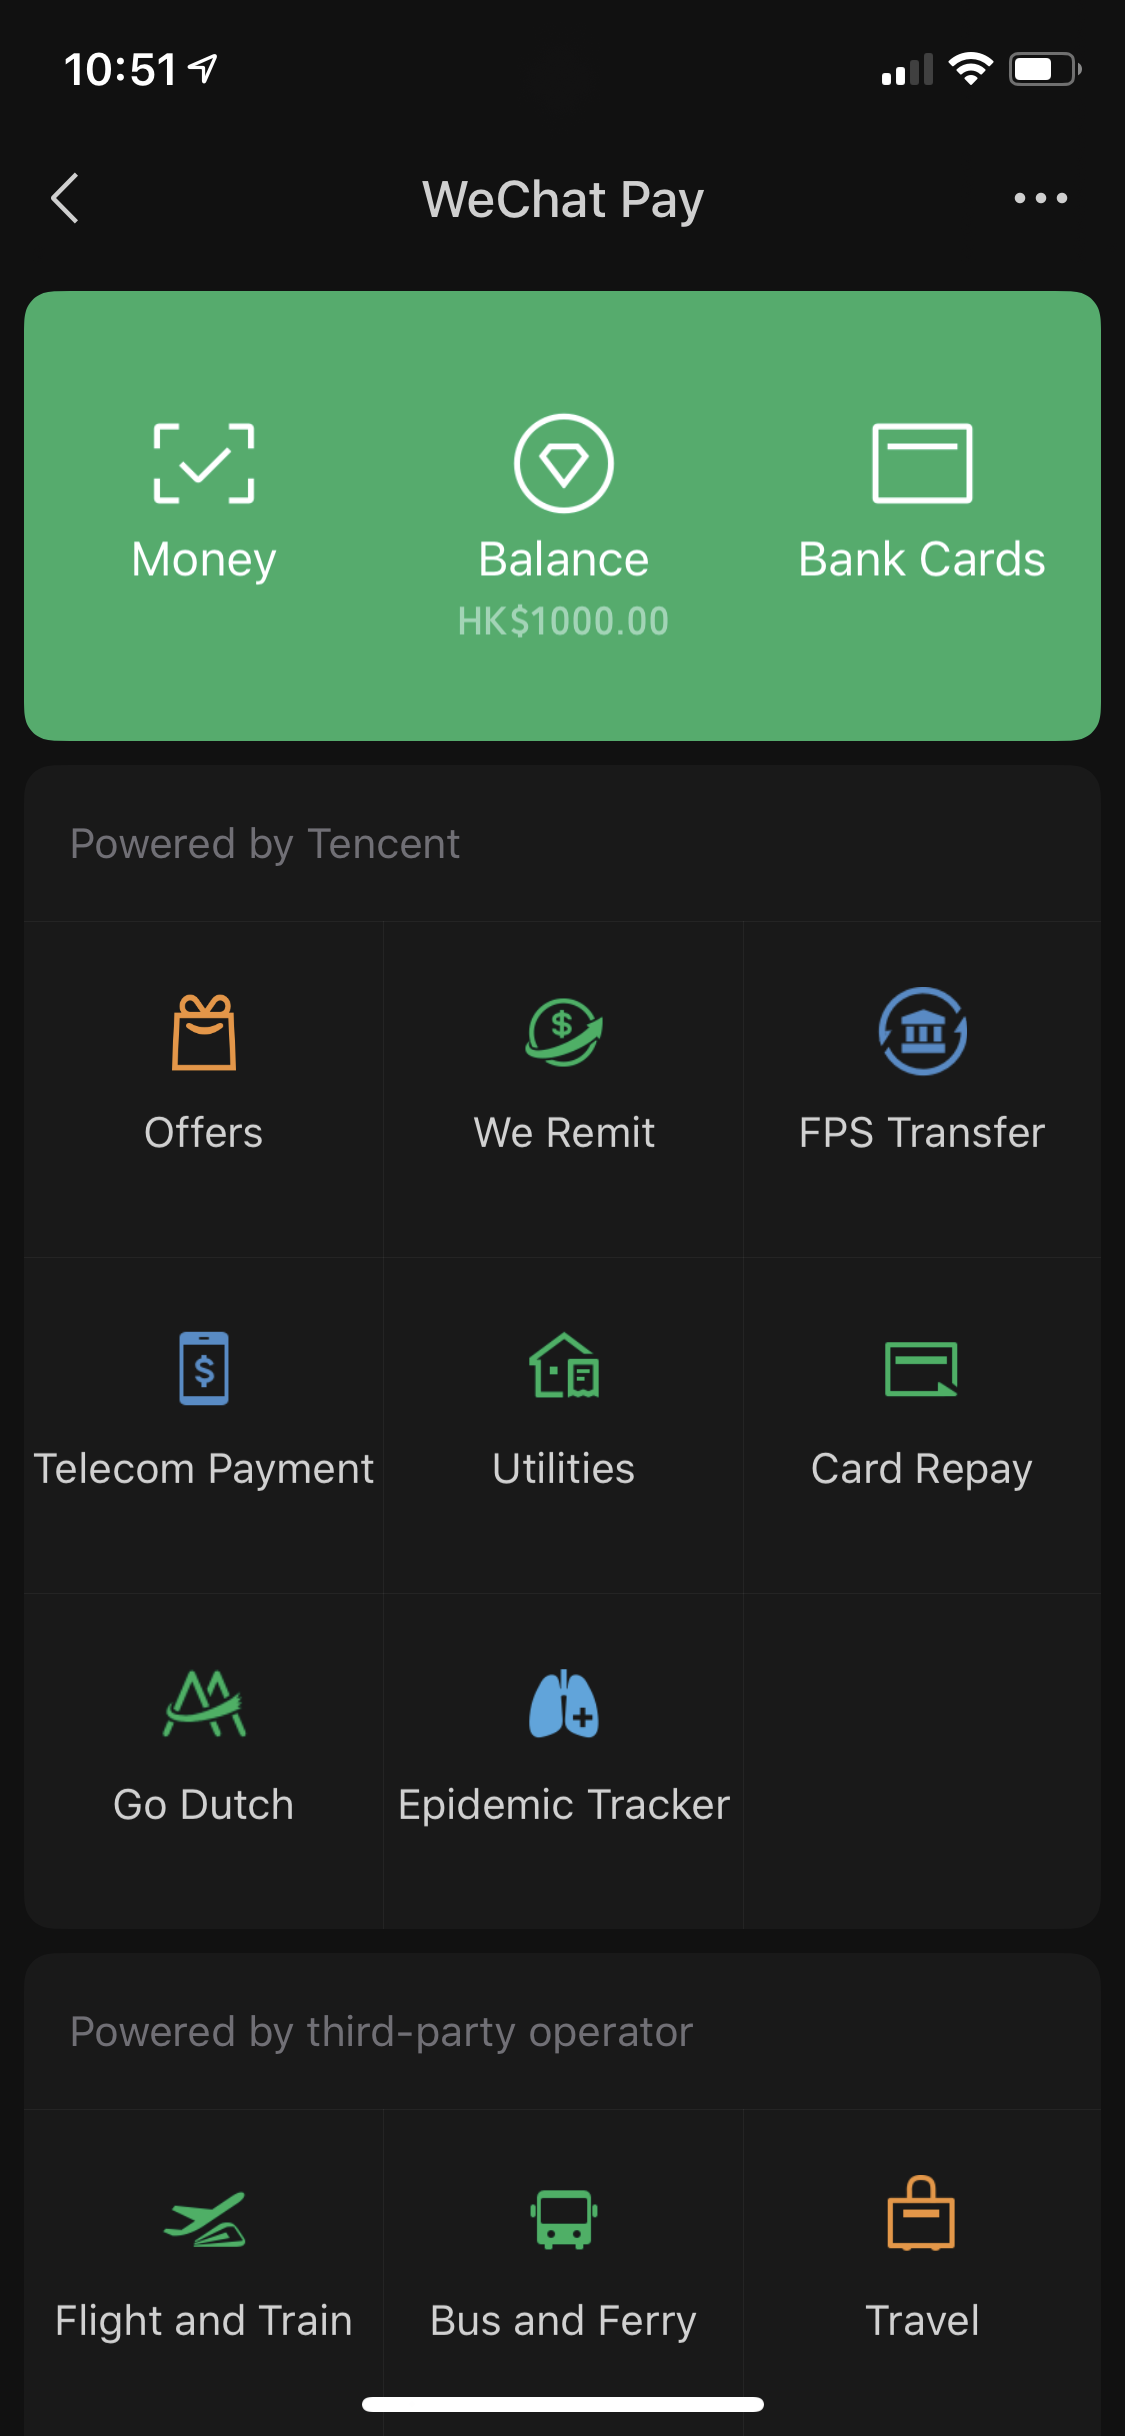 pay with wechat